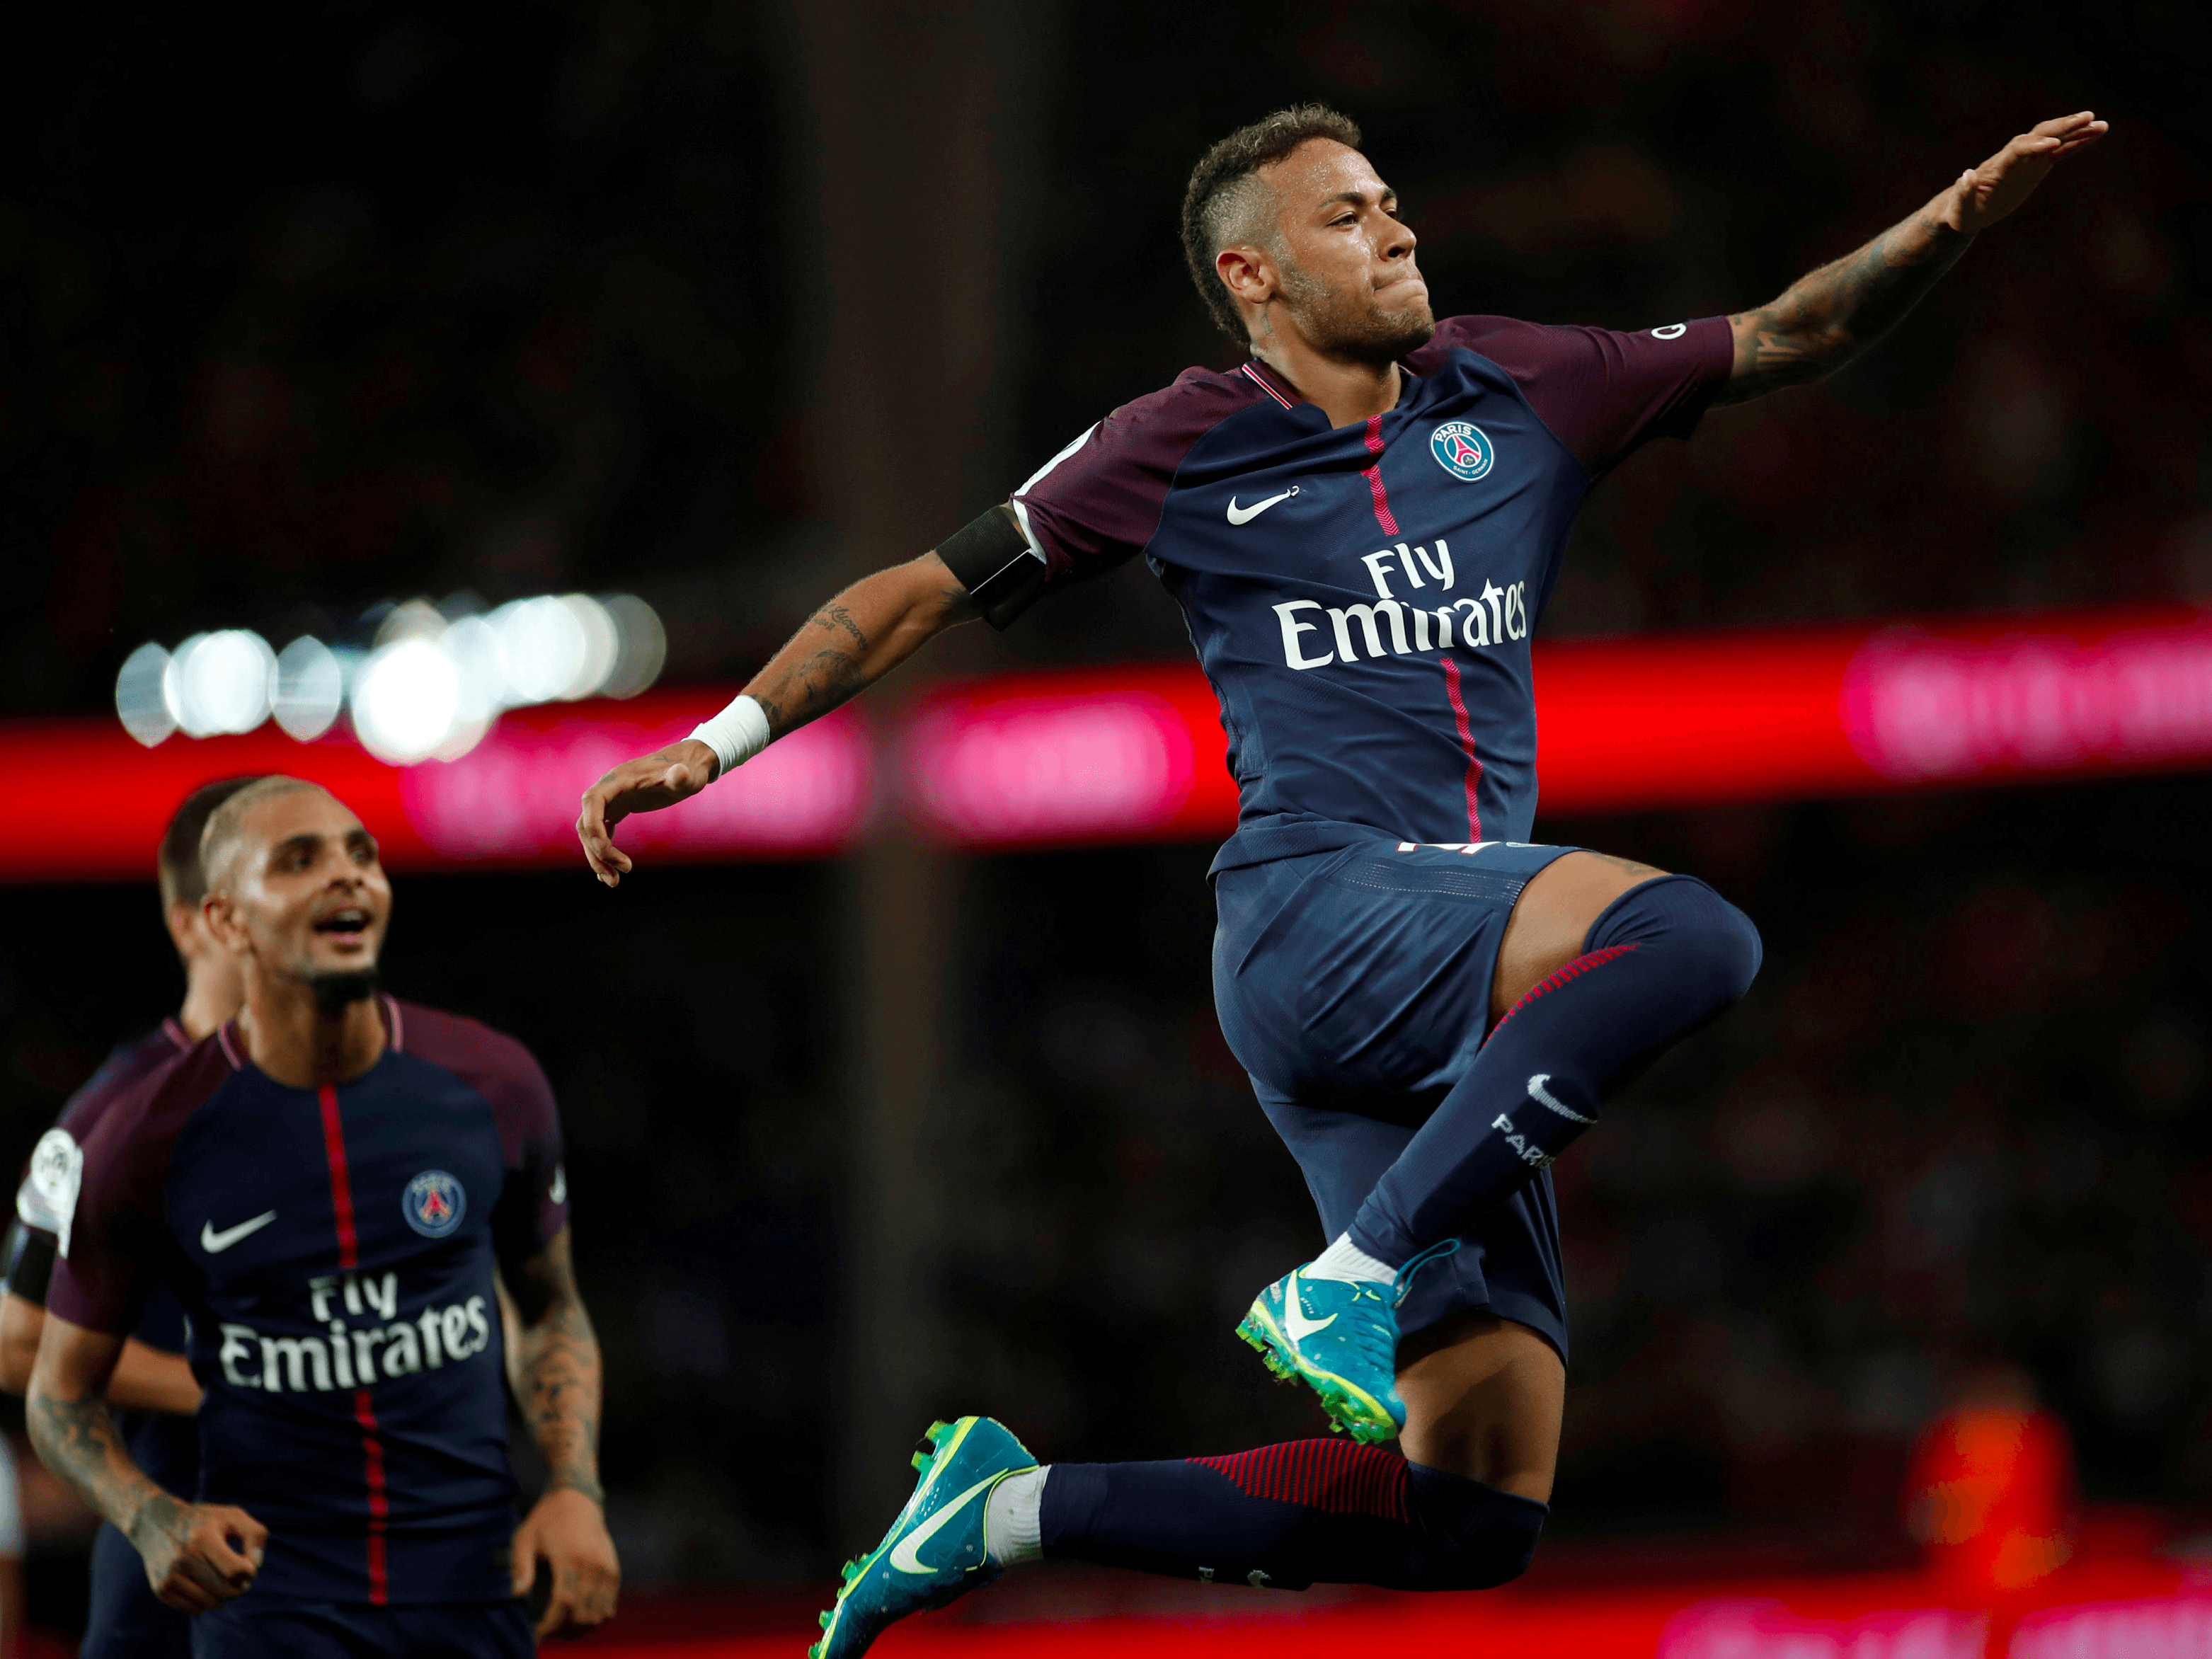 Neymar had an outrageous PSG home debut